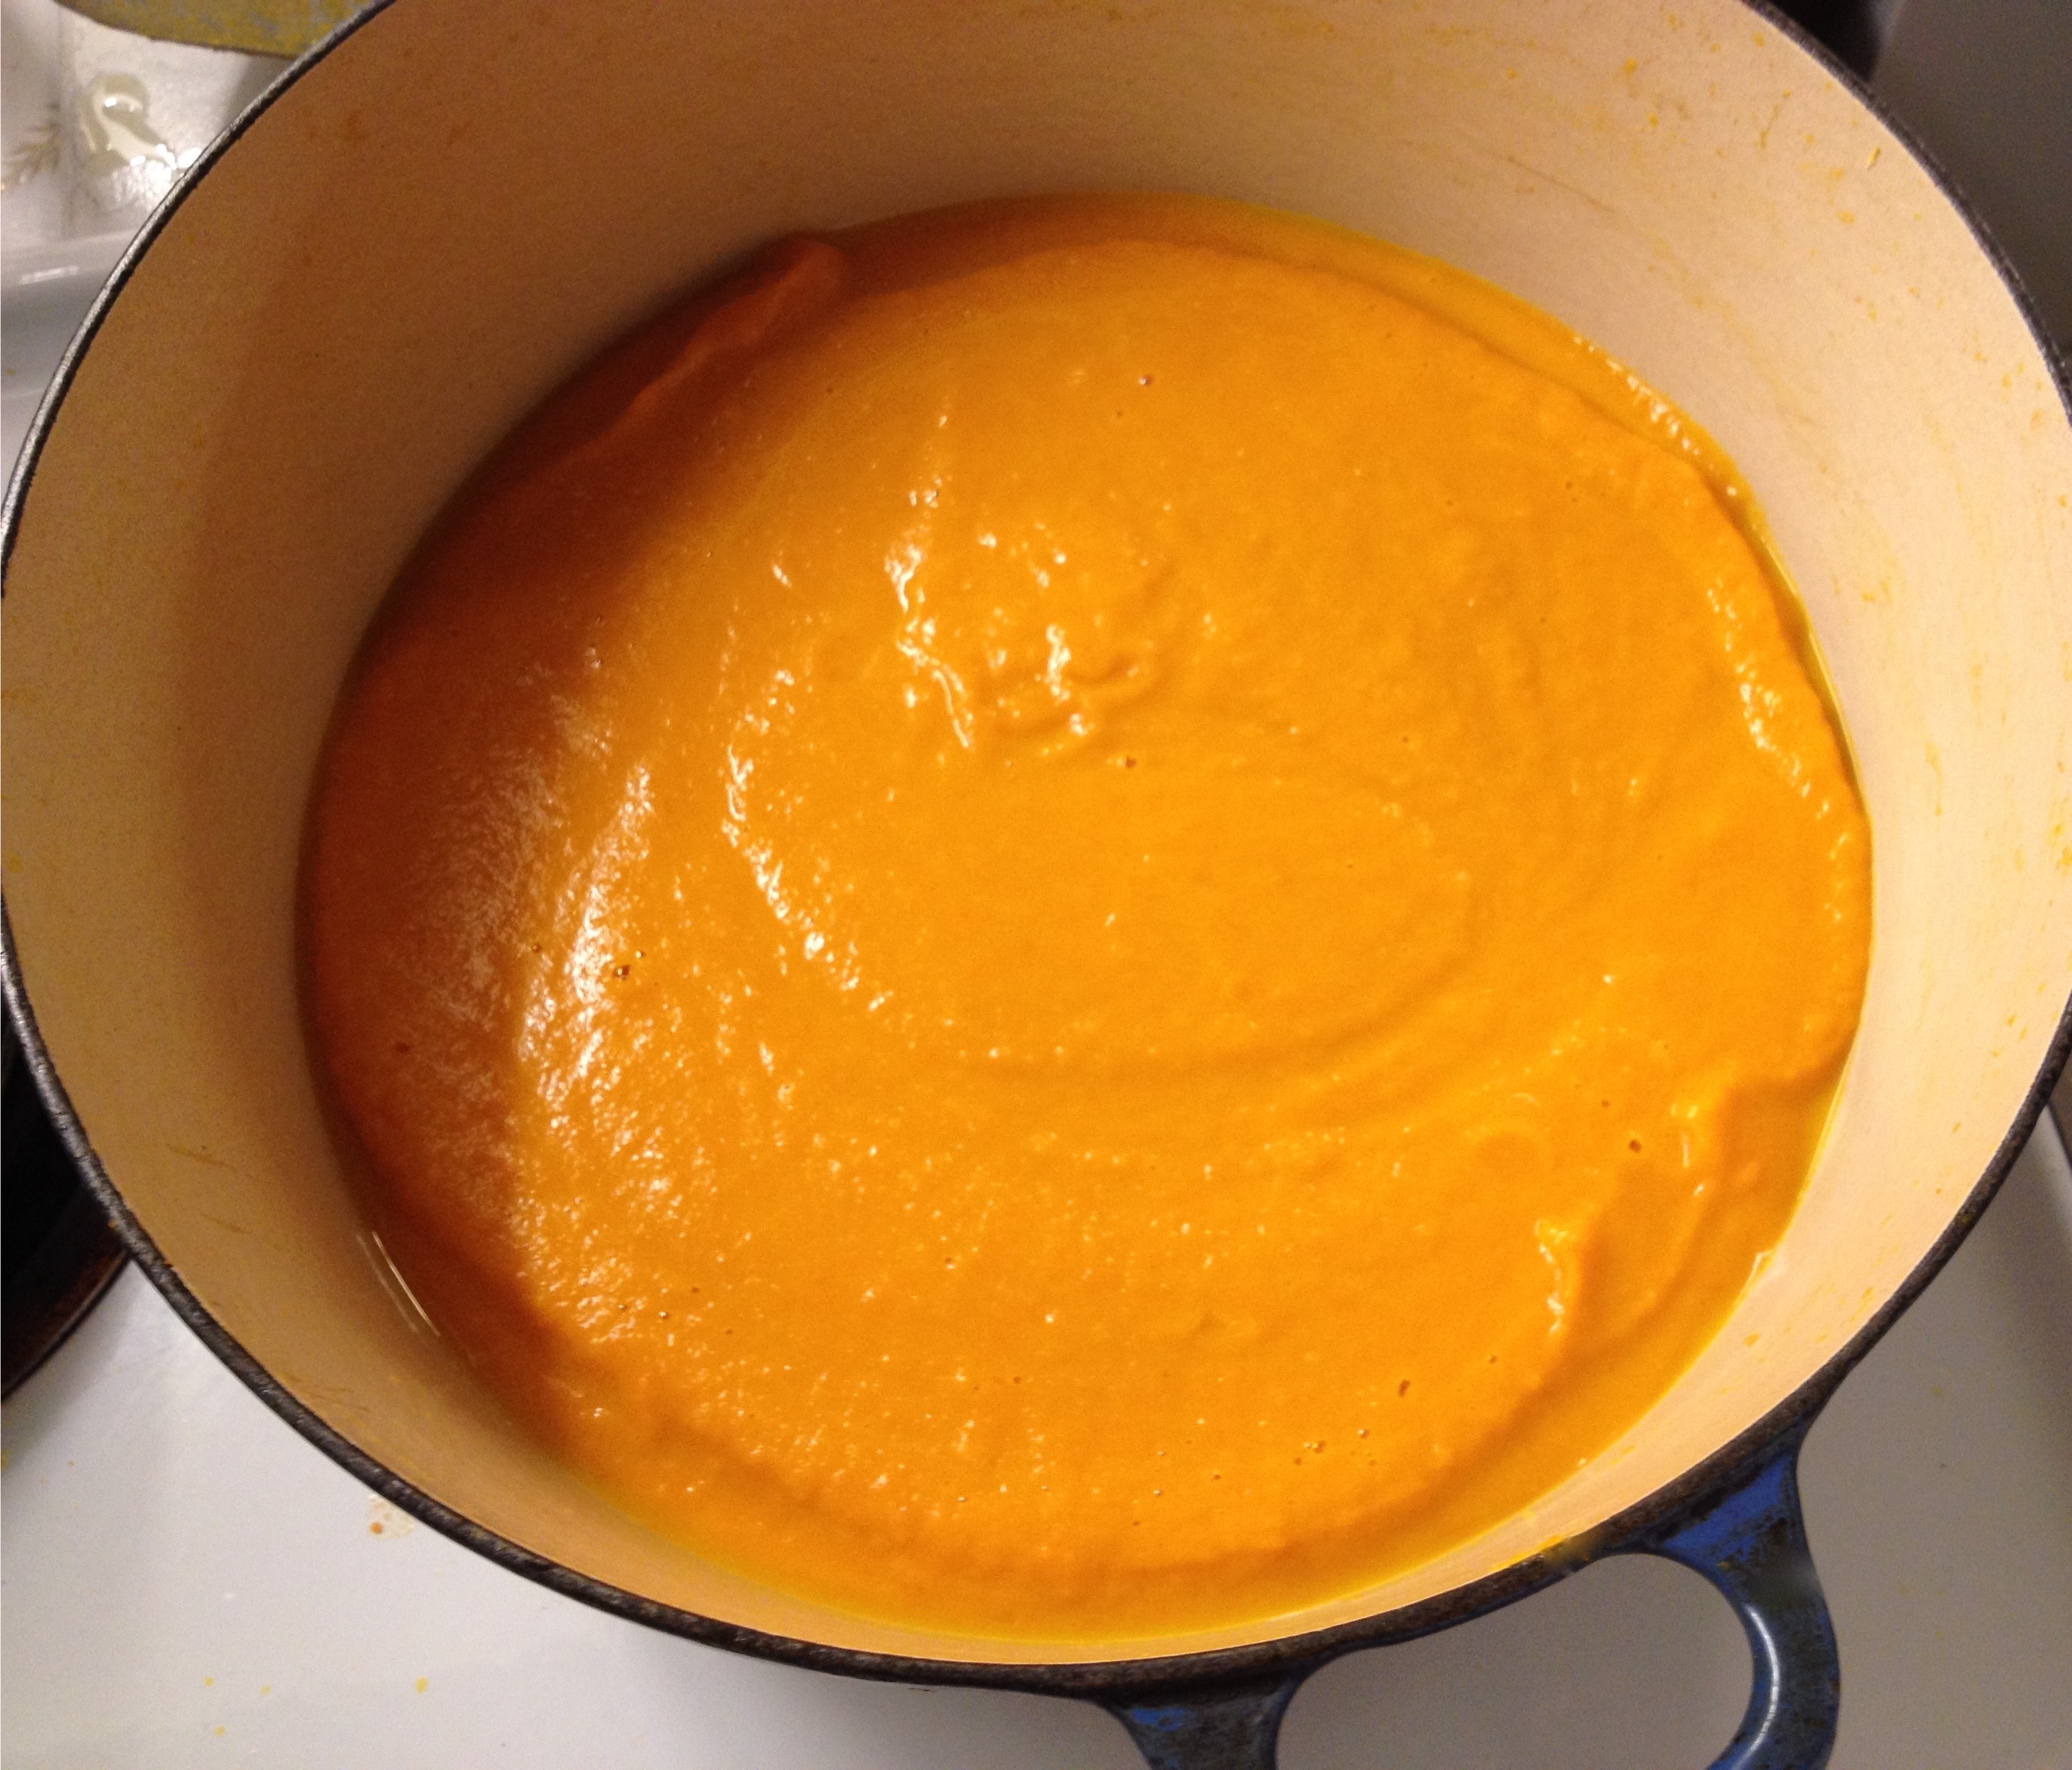 Carrot ginger soup finished in a Le Creuset pot.